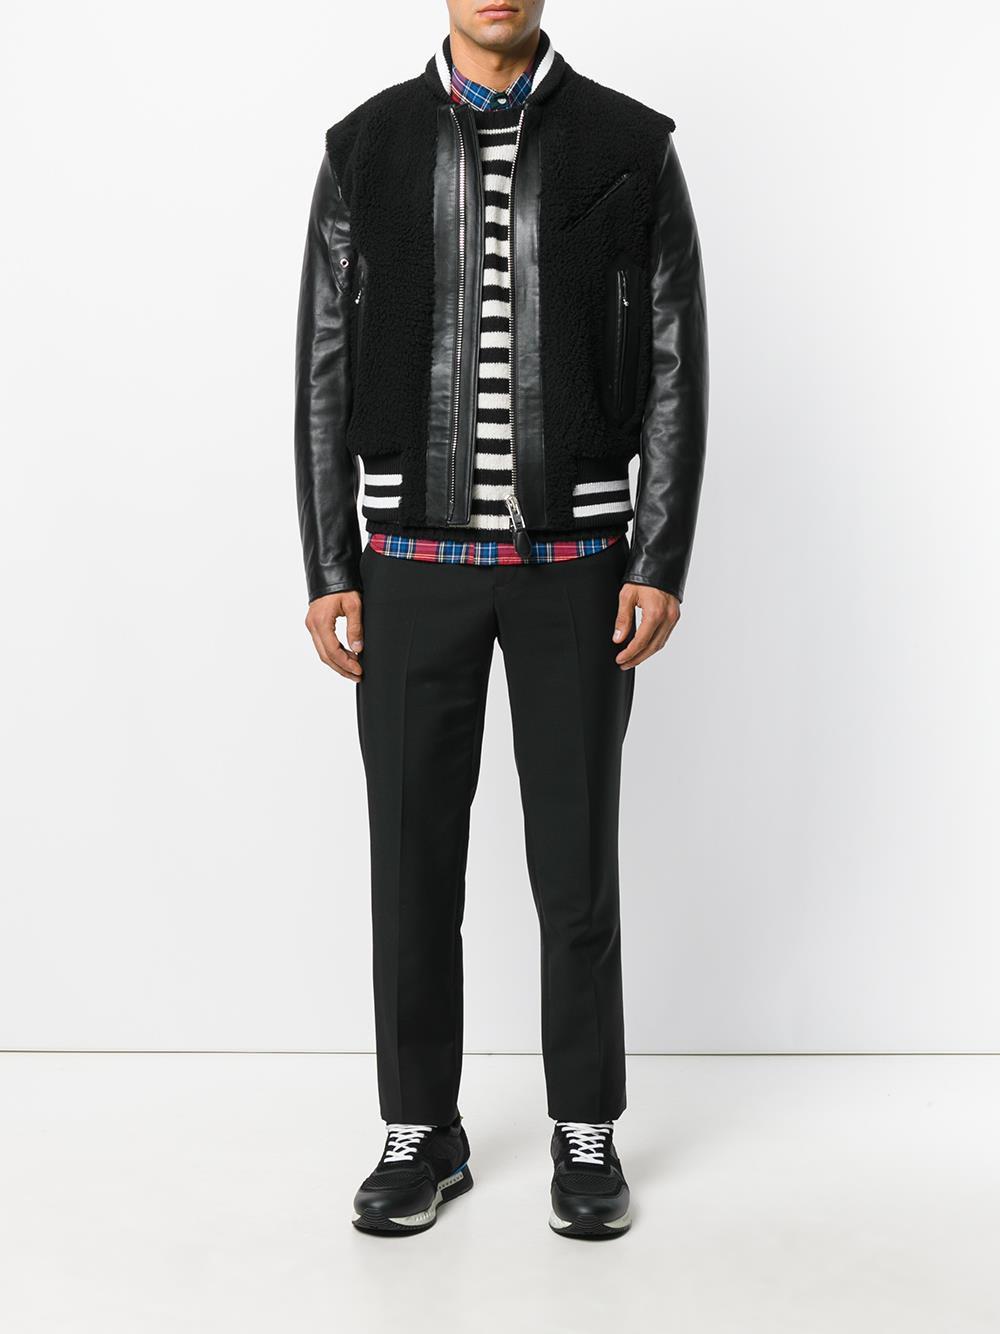 Lyst - Givenchy Shearling And Leather Bomber Jacket in Black for Men